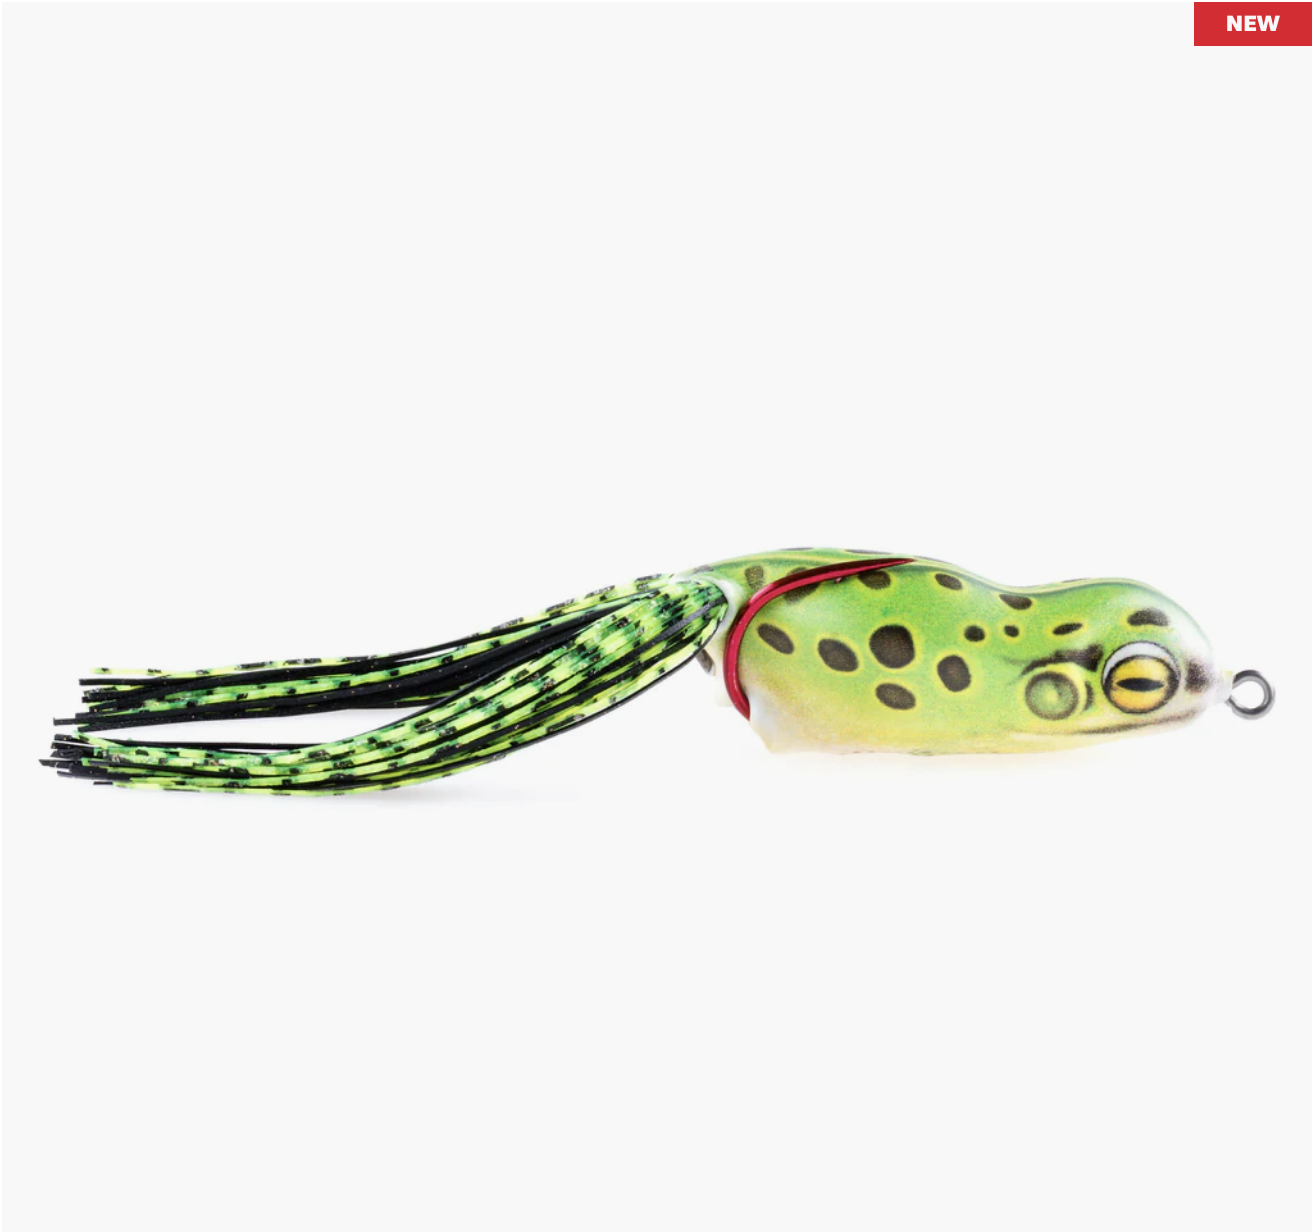 Launch Frog - Modern Outdoor Tackle